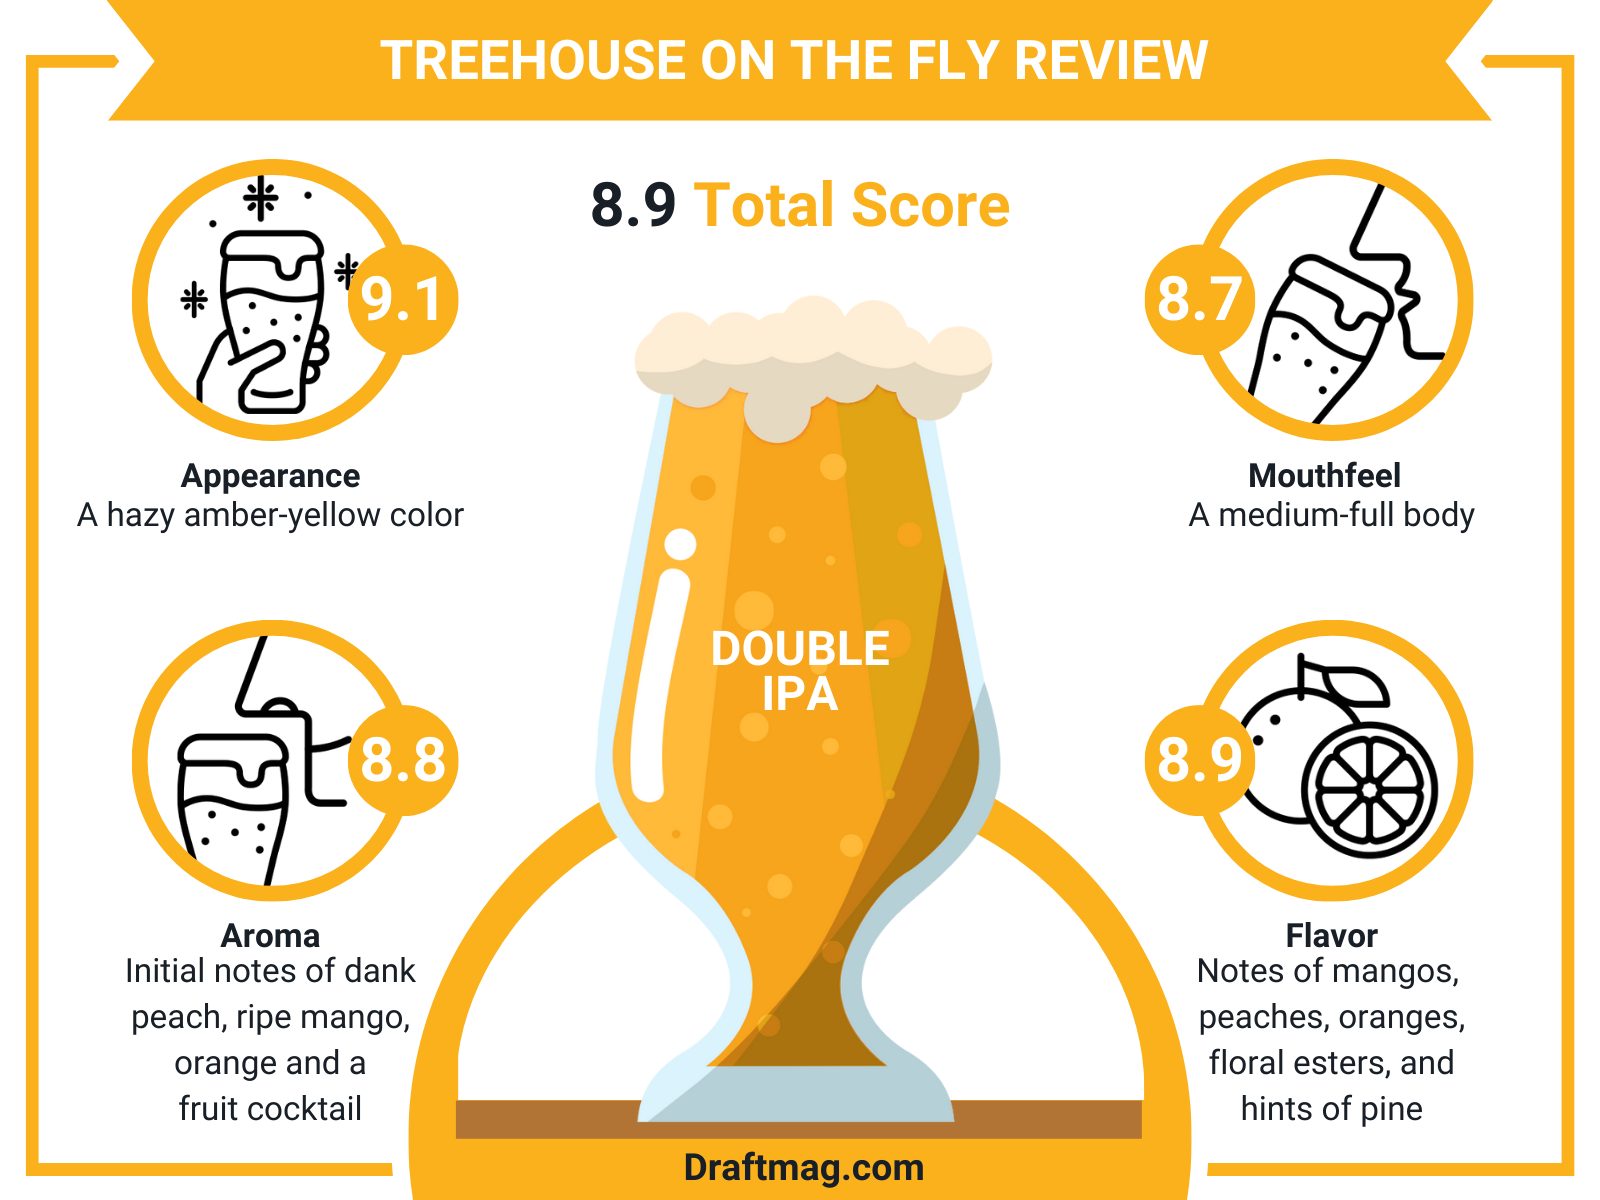 Treehouse On The Fly Review Infographic